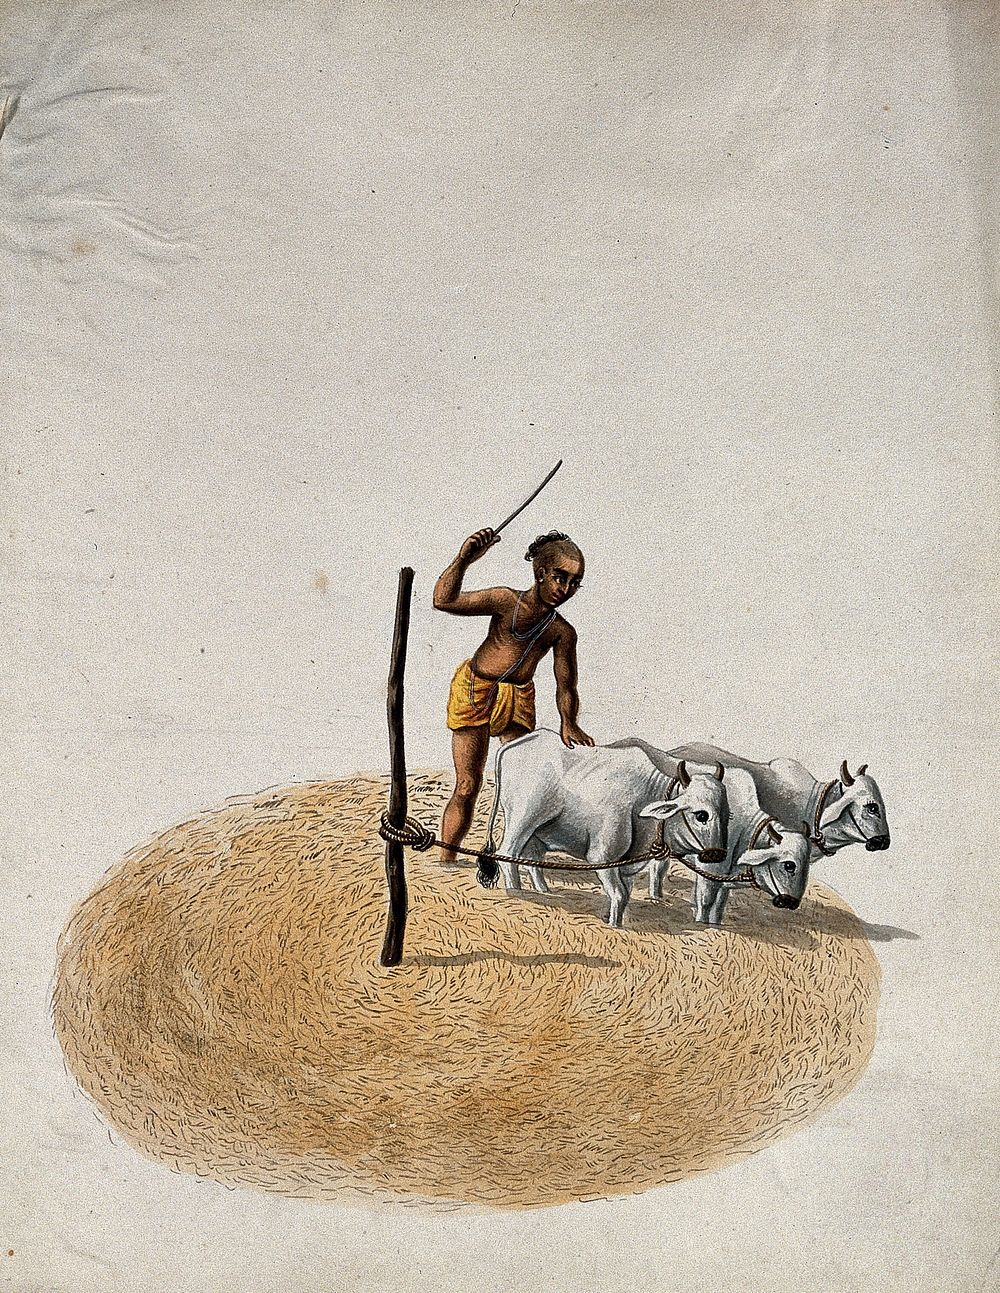 A man cultivating his land, using three cows. Gouache painting by an Indian artist.